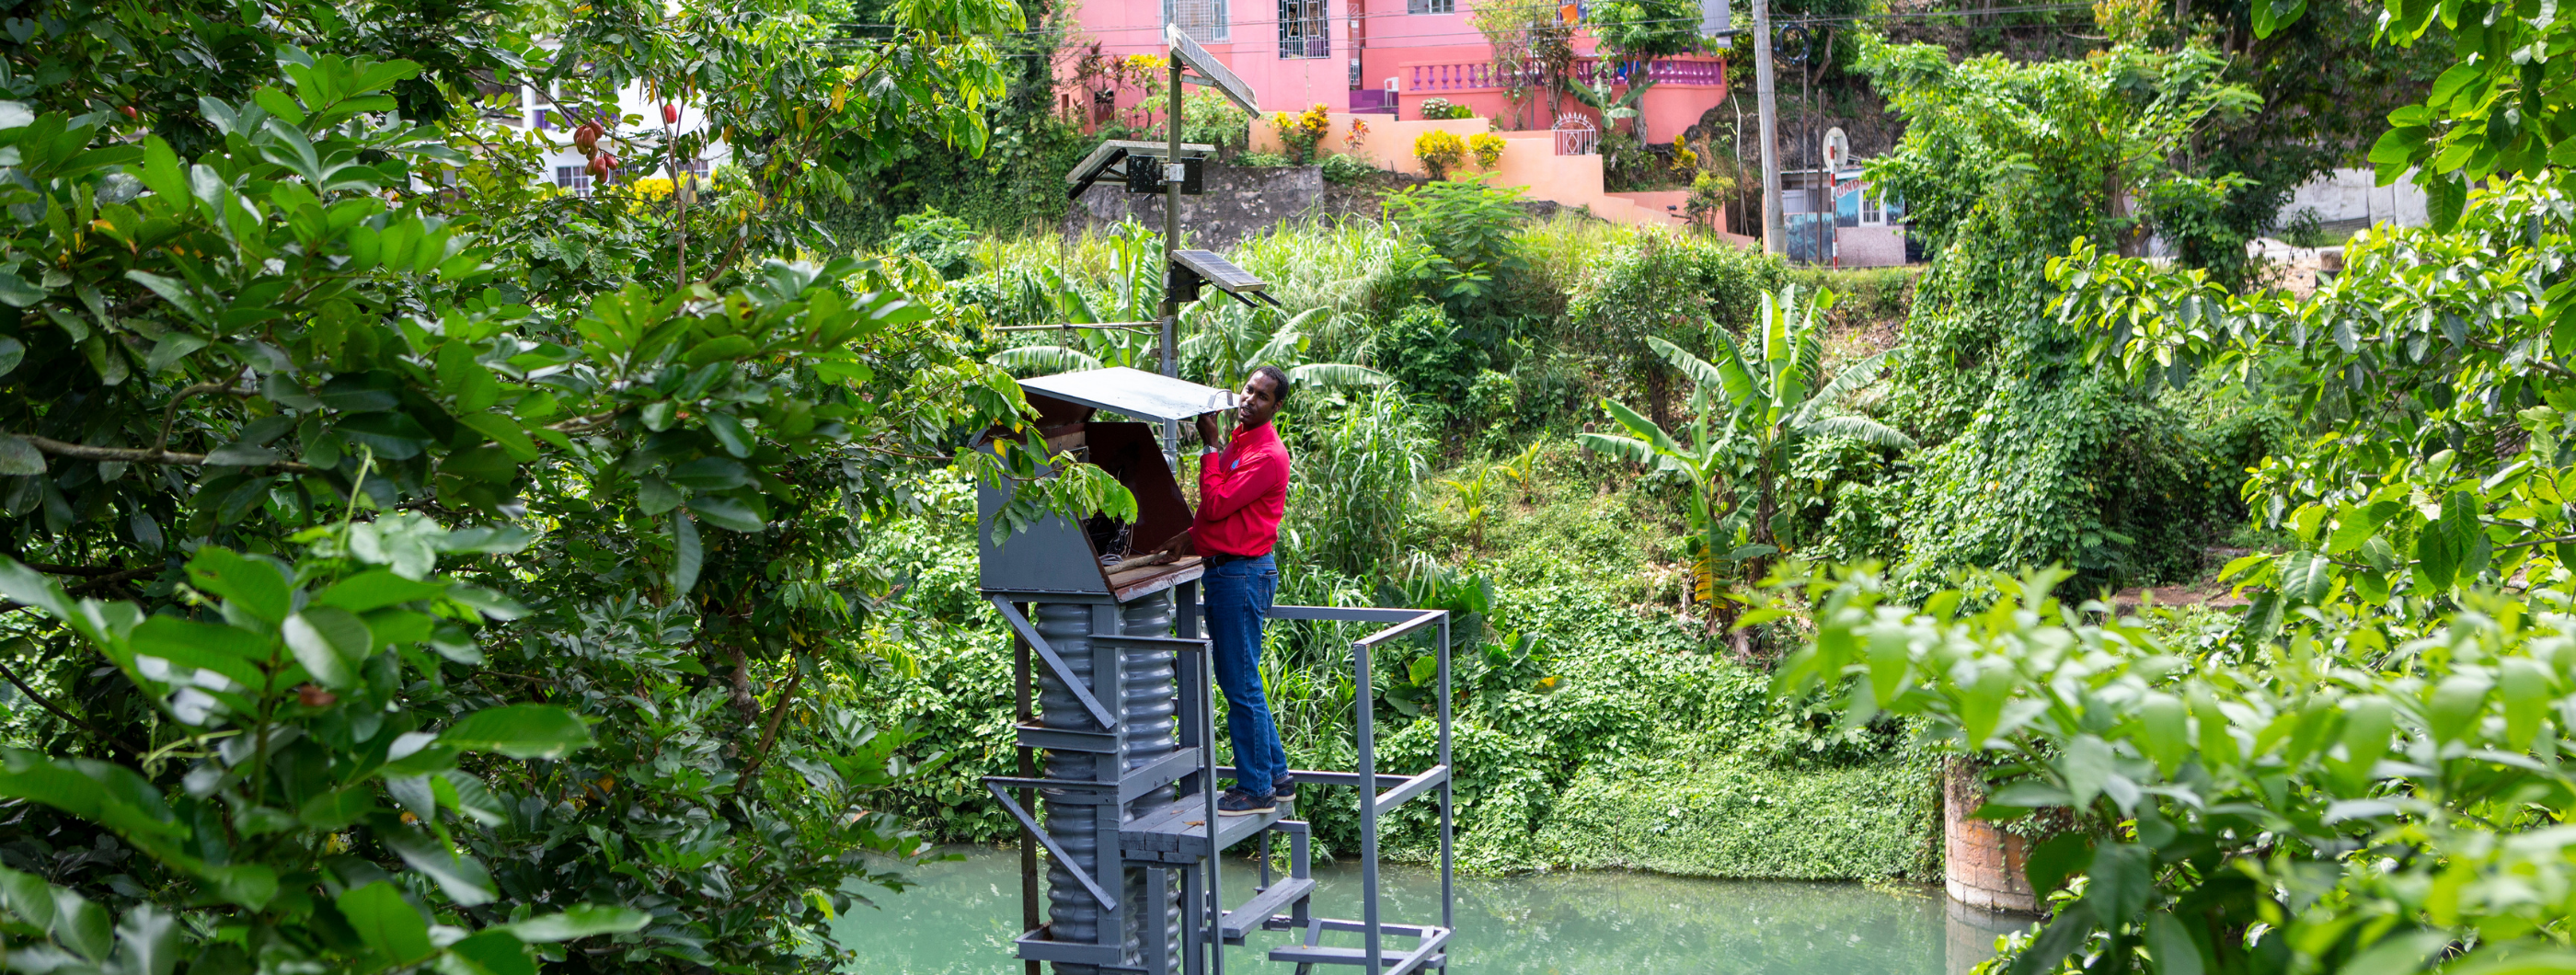 Man in red shirt checking flood monitoring station in Jamaica